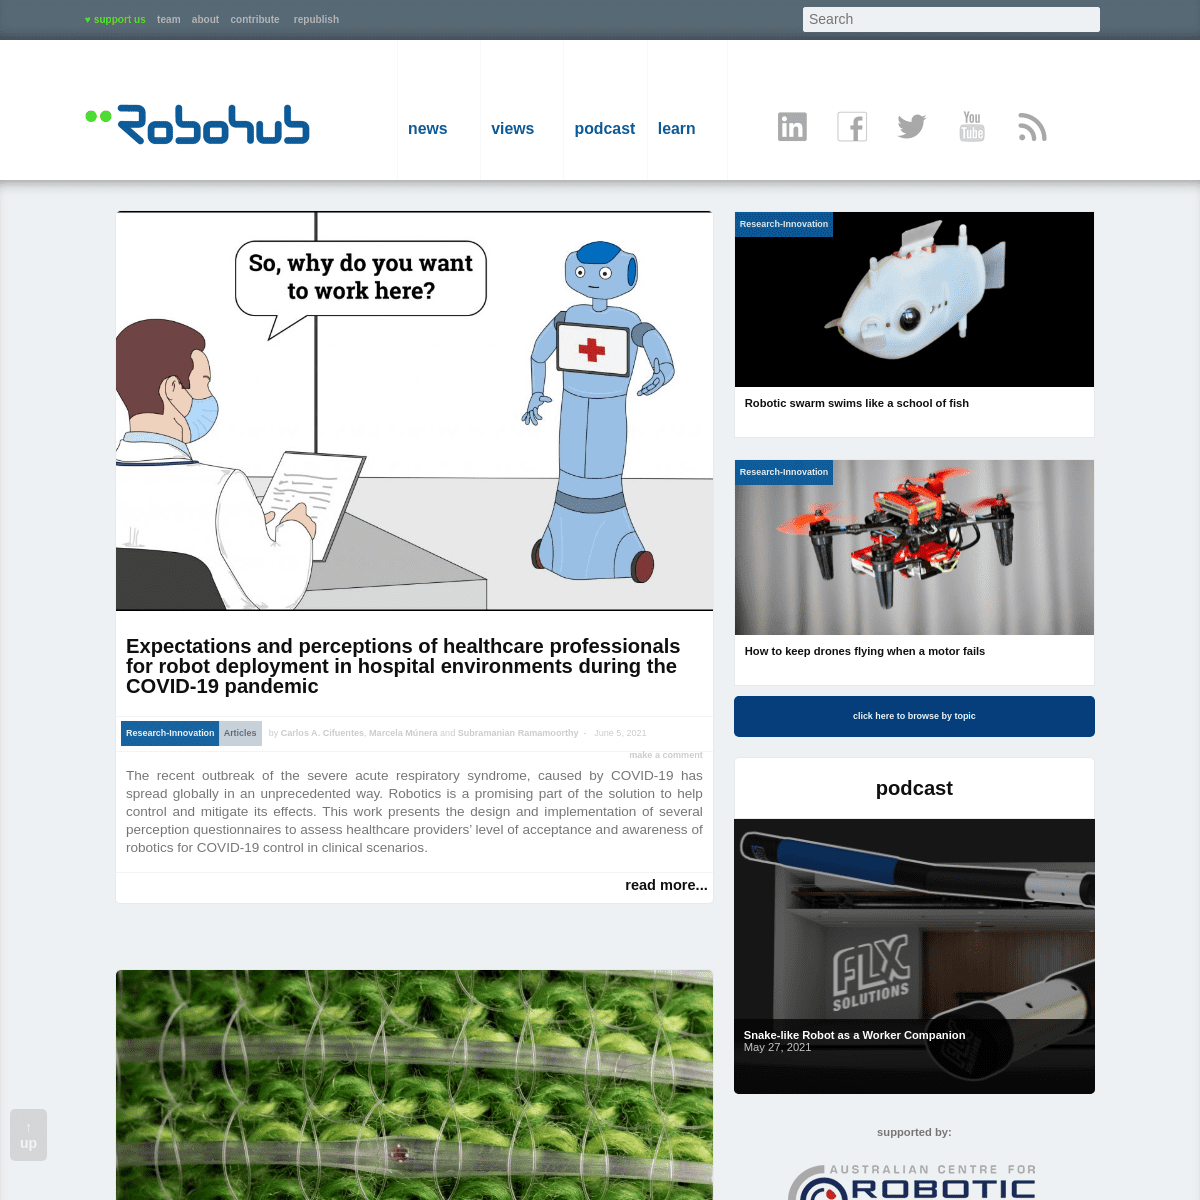 A complete backup of https://robohub.org